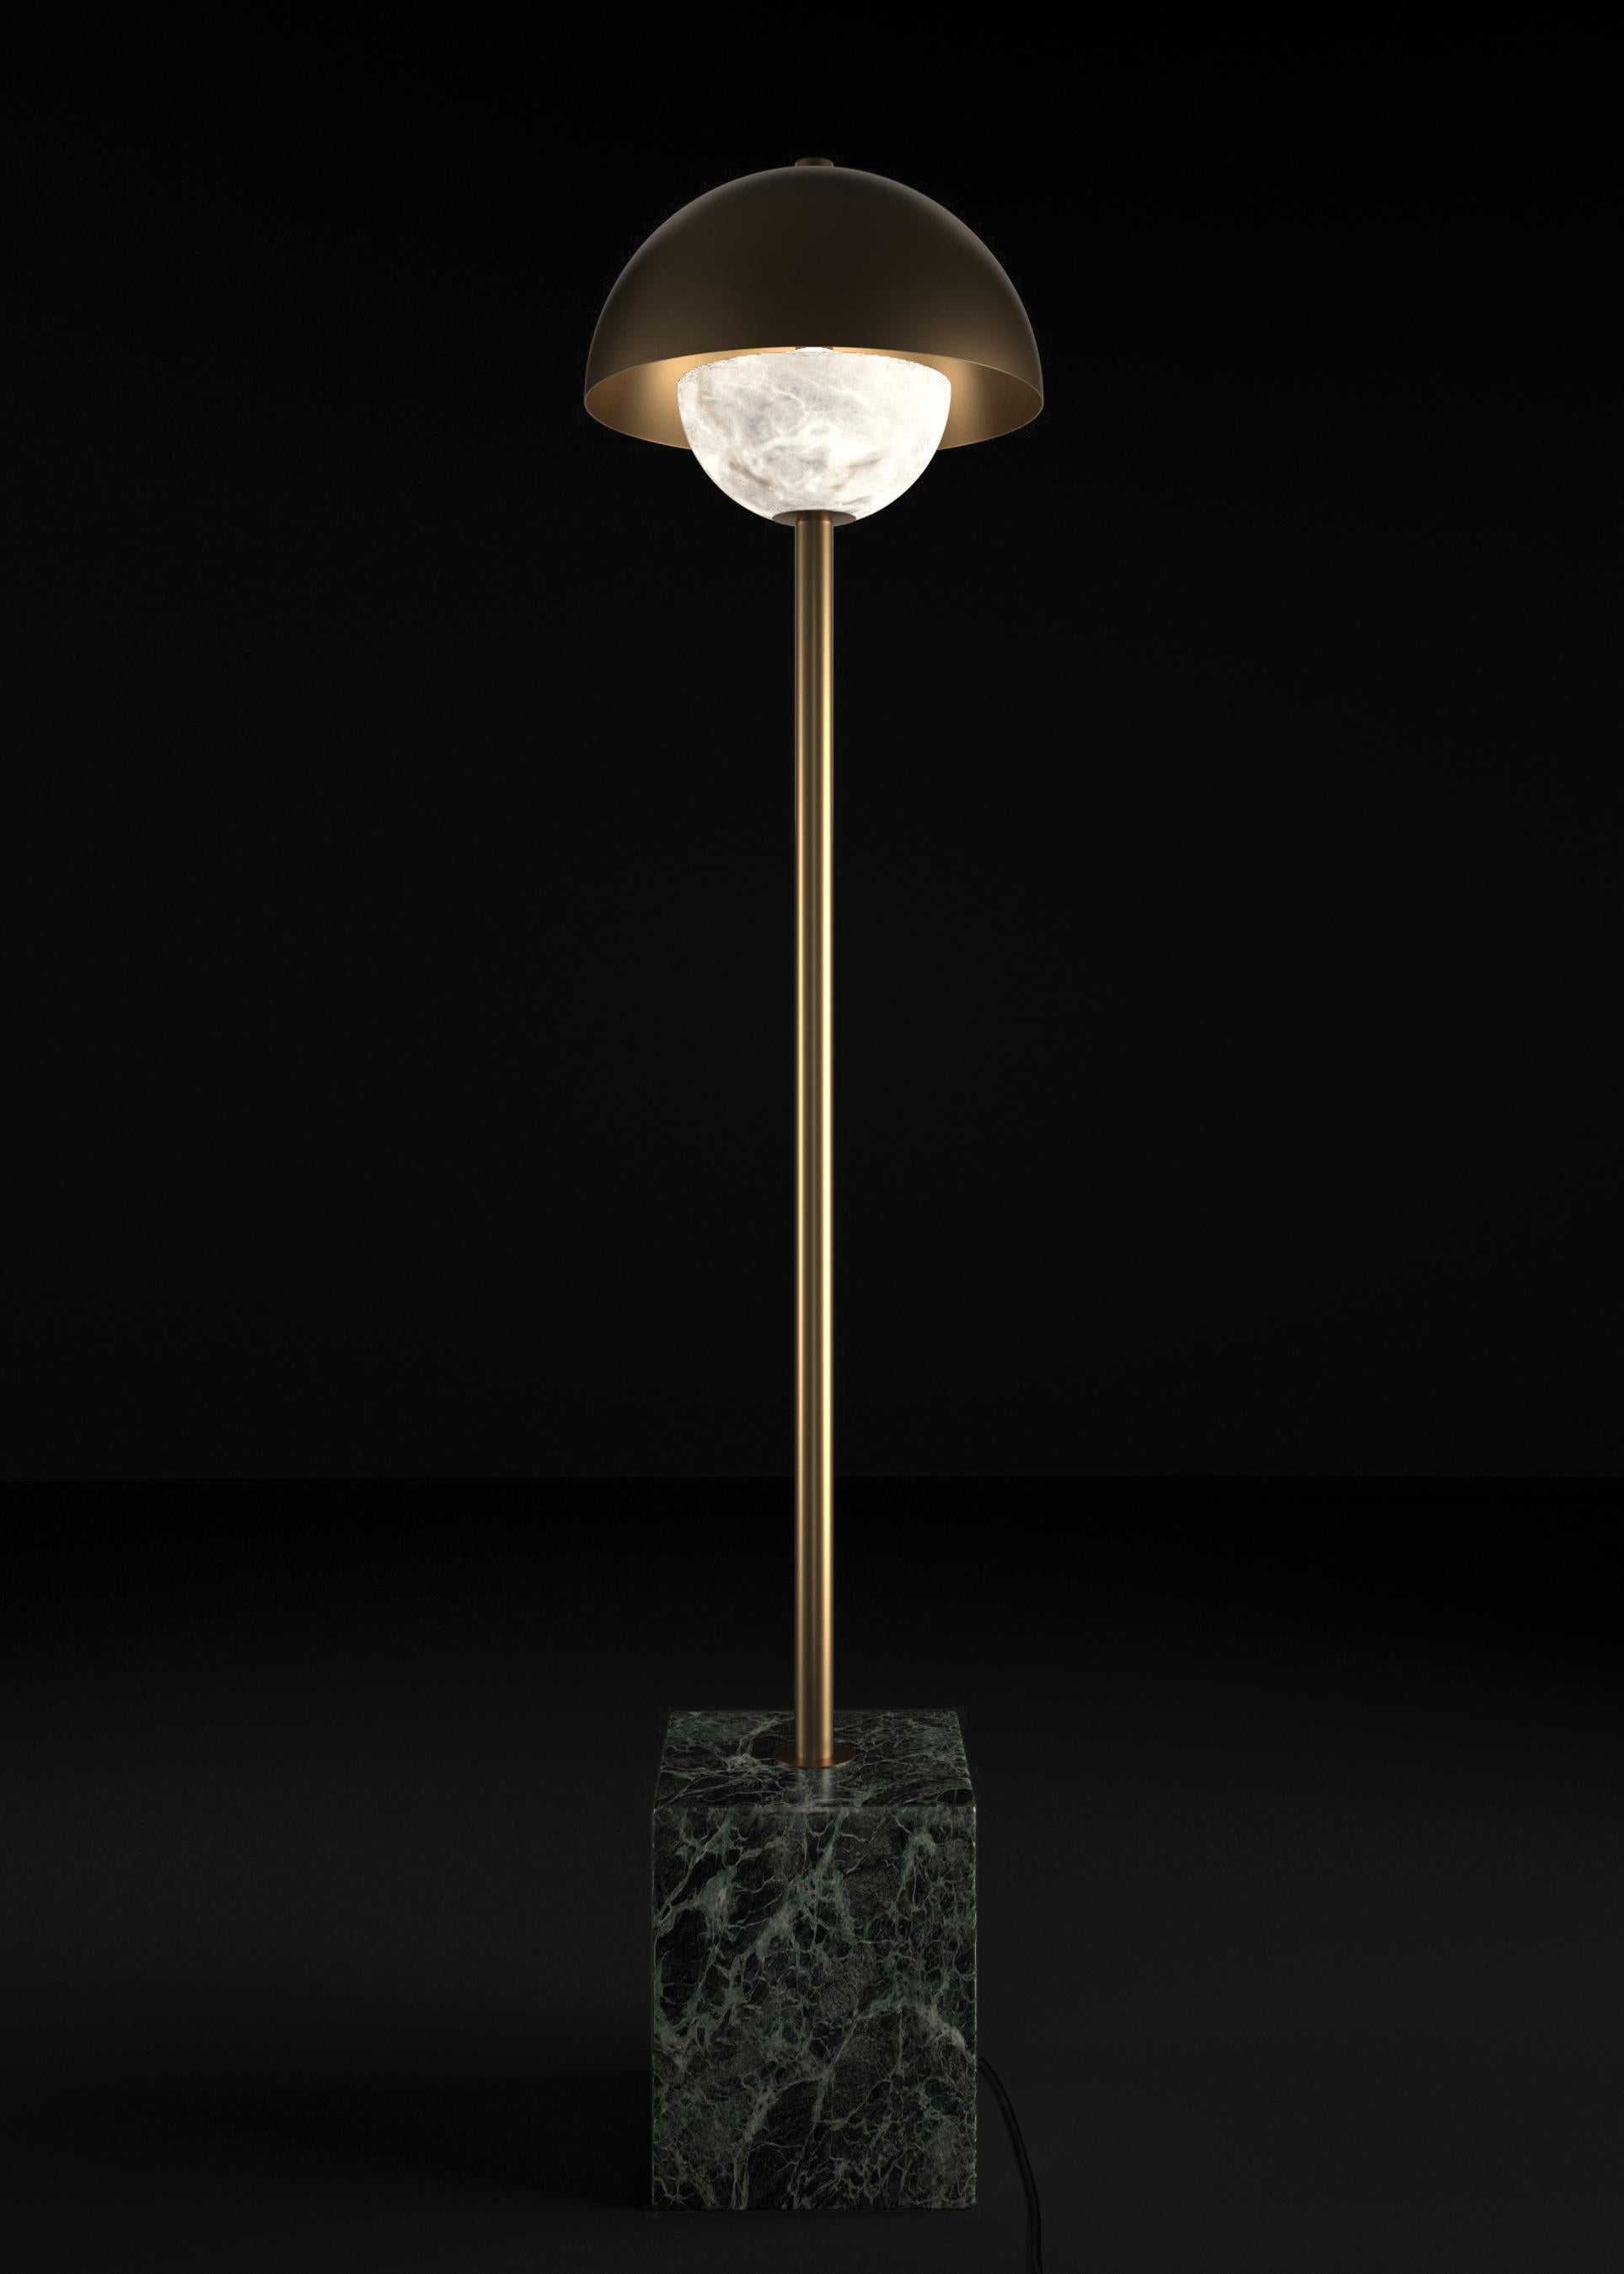 Apollo Bronze Floor Lamp by Alabastro Italiano
Dimensions: D 30 x W 30 x H 130 cm.
Materials: White alabaster, Nero Marquinia marble, black silk cables and bronze.

Available in different finishes: Shiny Silver, Bronze, Brushed Brass, Ruggine of